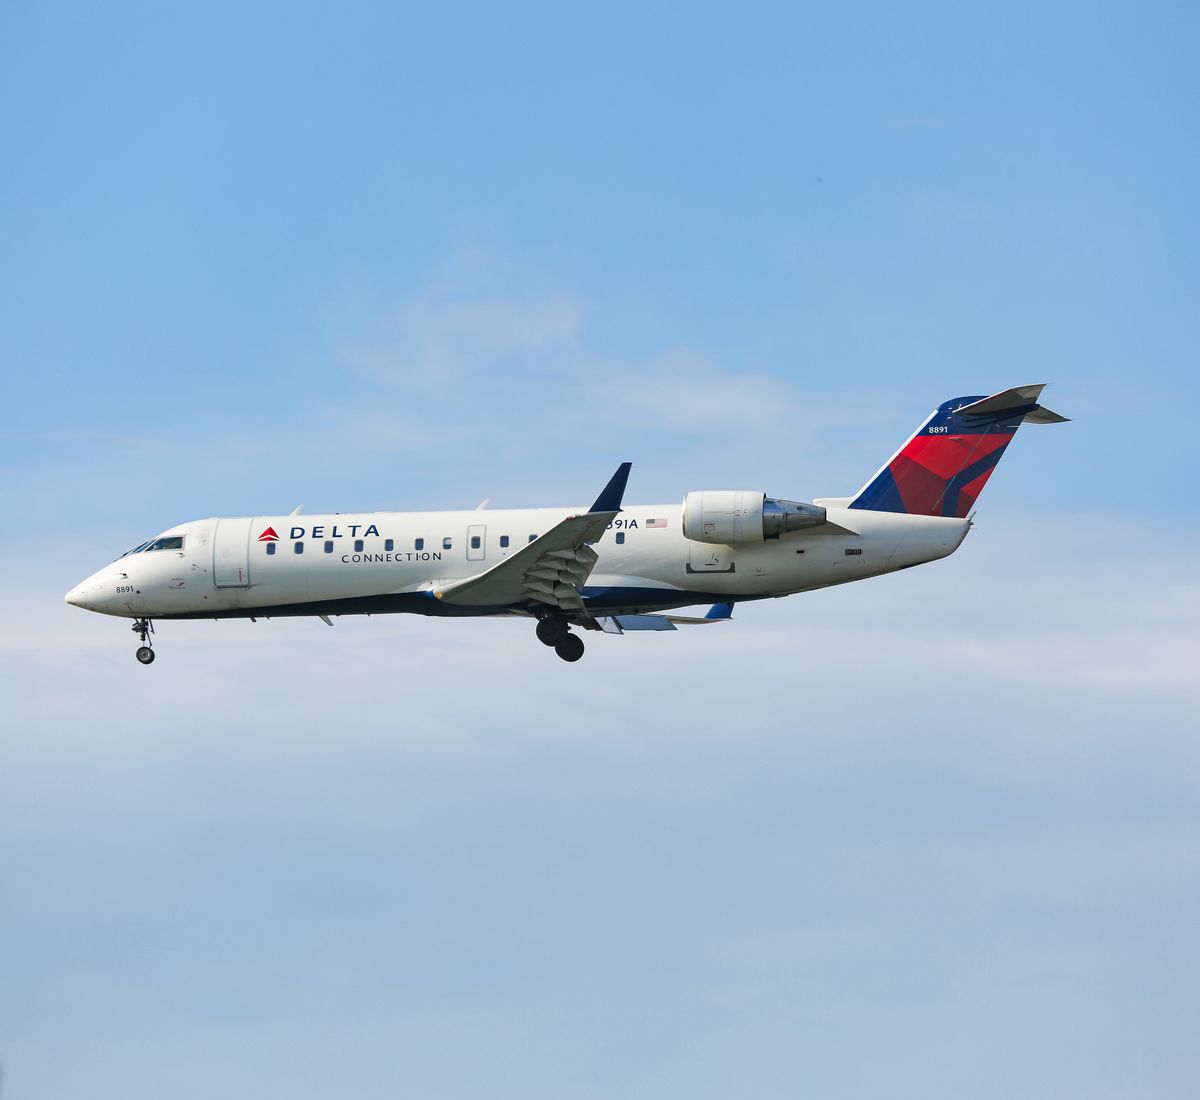 delta air lines bombardier crj 200 aircraft as seen on final approach landing at new york jfk international airport, ny, usa the flight is operated by endeavor air, an american regional airline that operates as delta connection the airplane has the registration n8891a dal dl delta airlines is a major legacy carrier, member of skyteam aviation alliance with headquarters in atlanta, georgia photo by nicolas economounurphoto via getty images